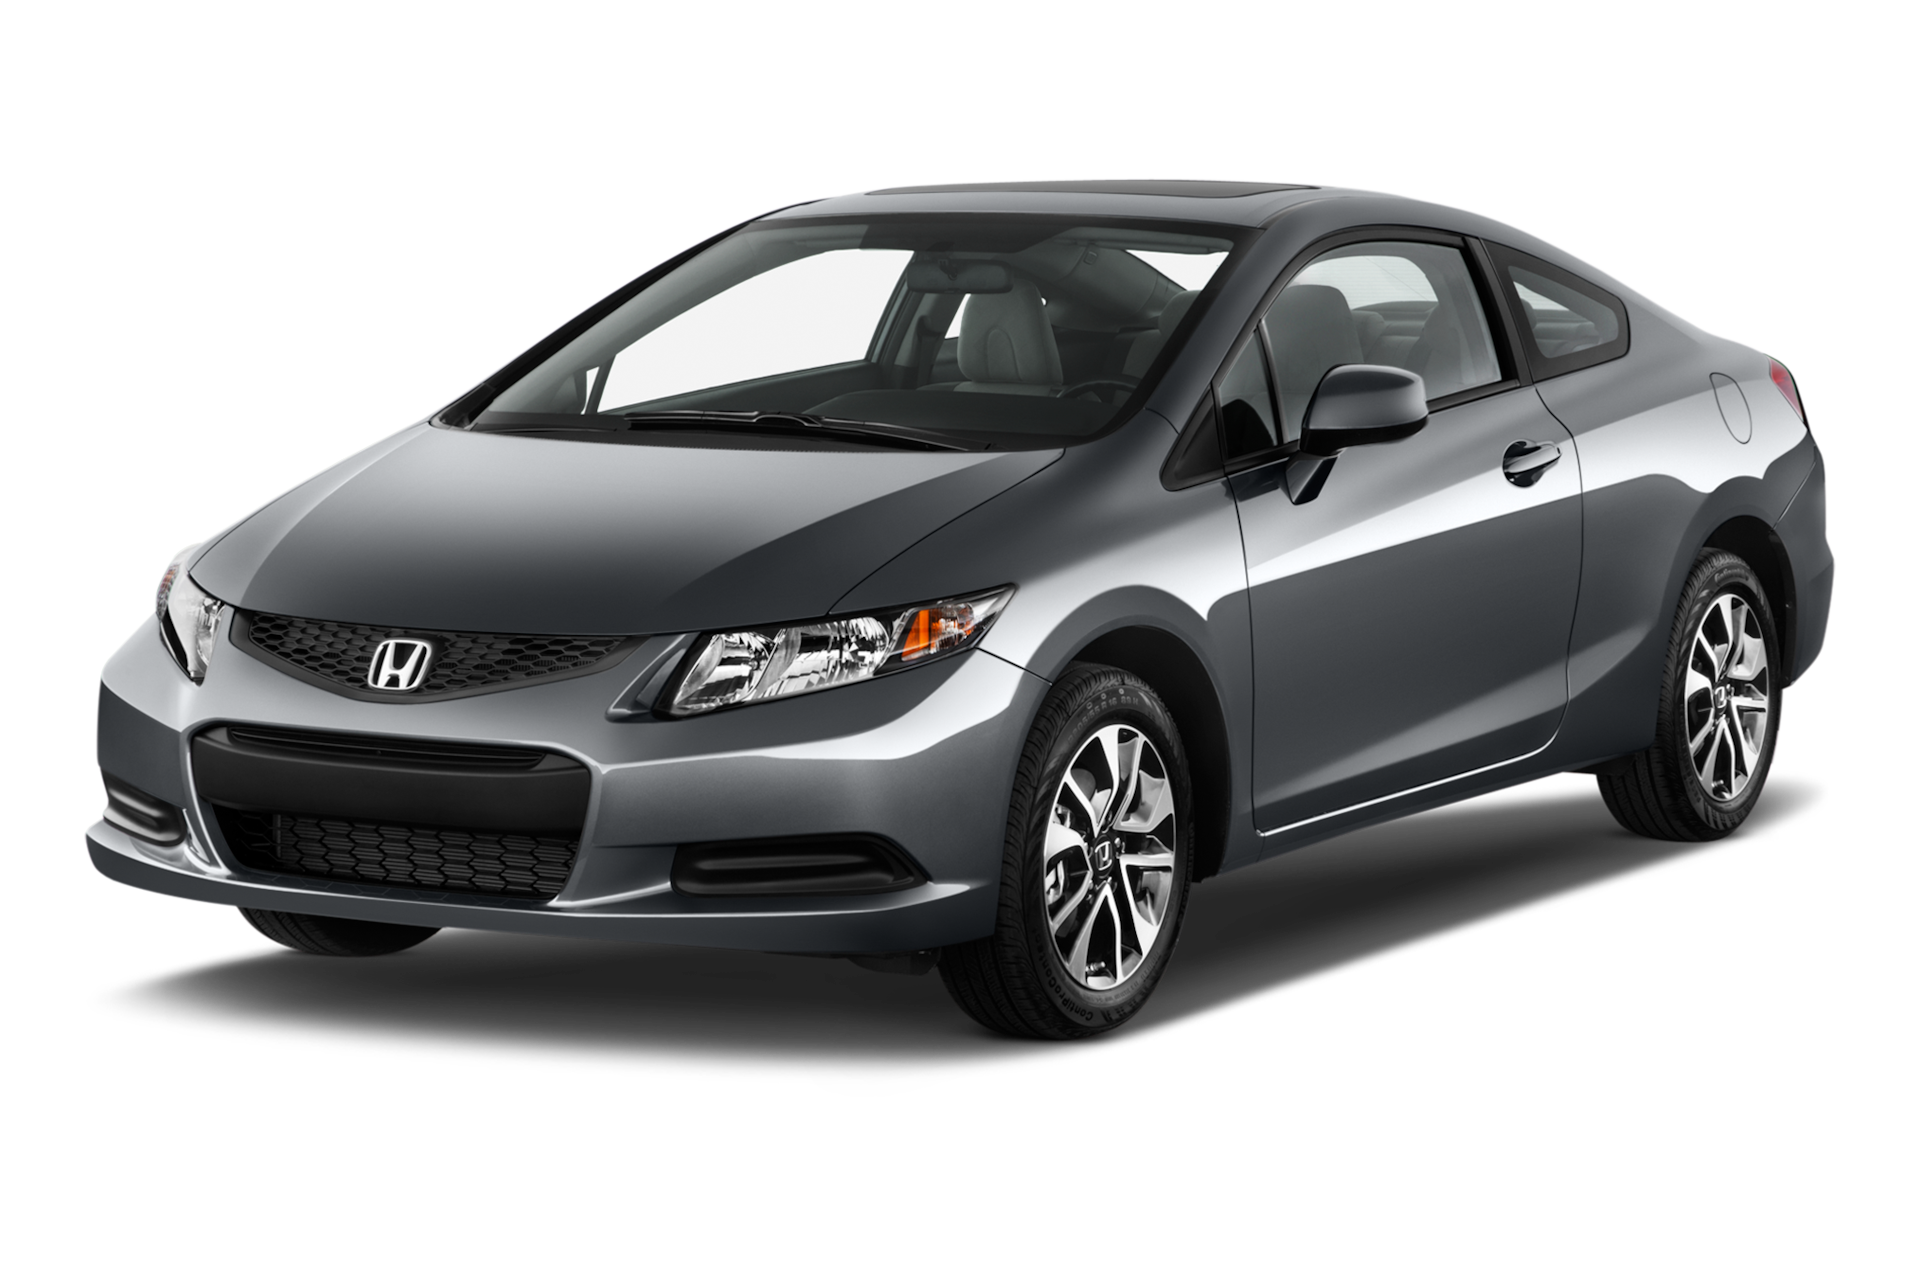 2013 Honda Civic Prices, Reviews, and Photos - MotorTrend